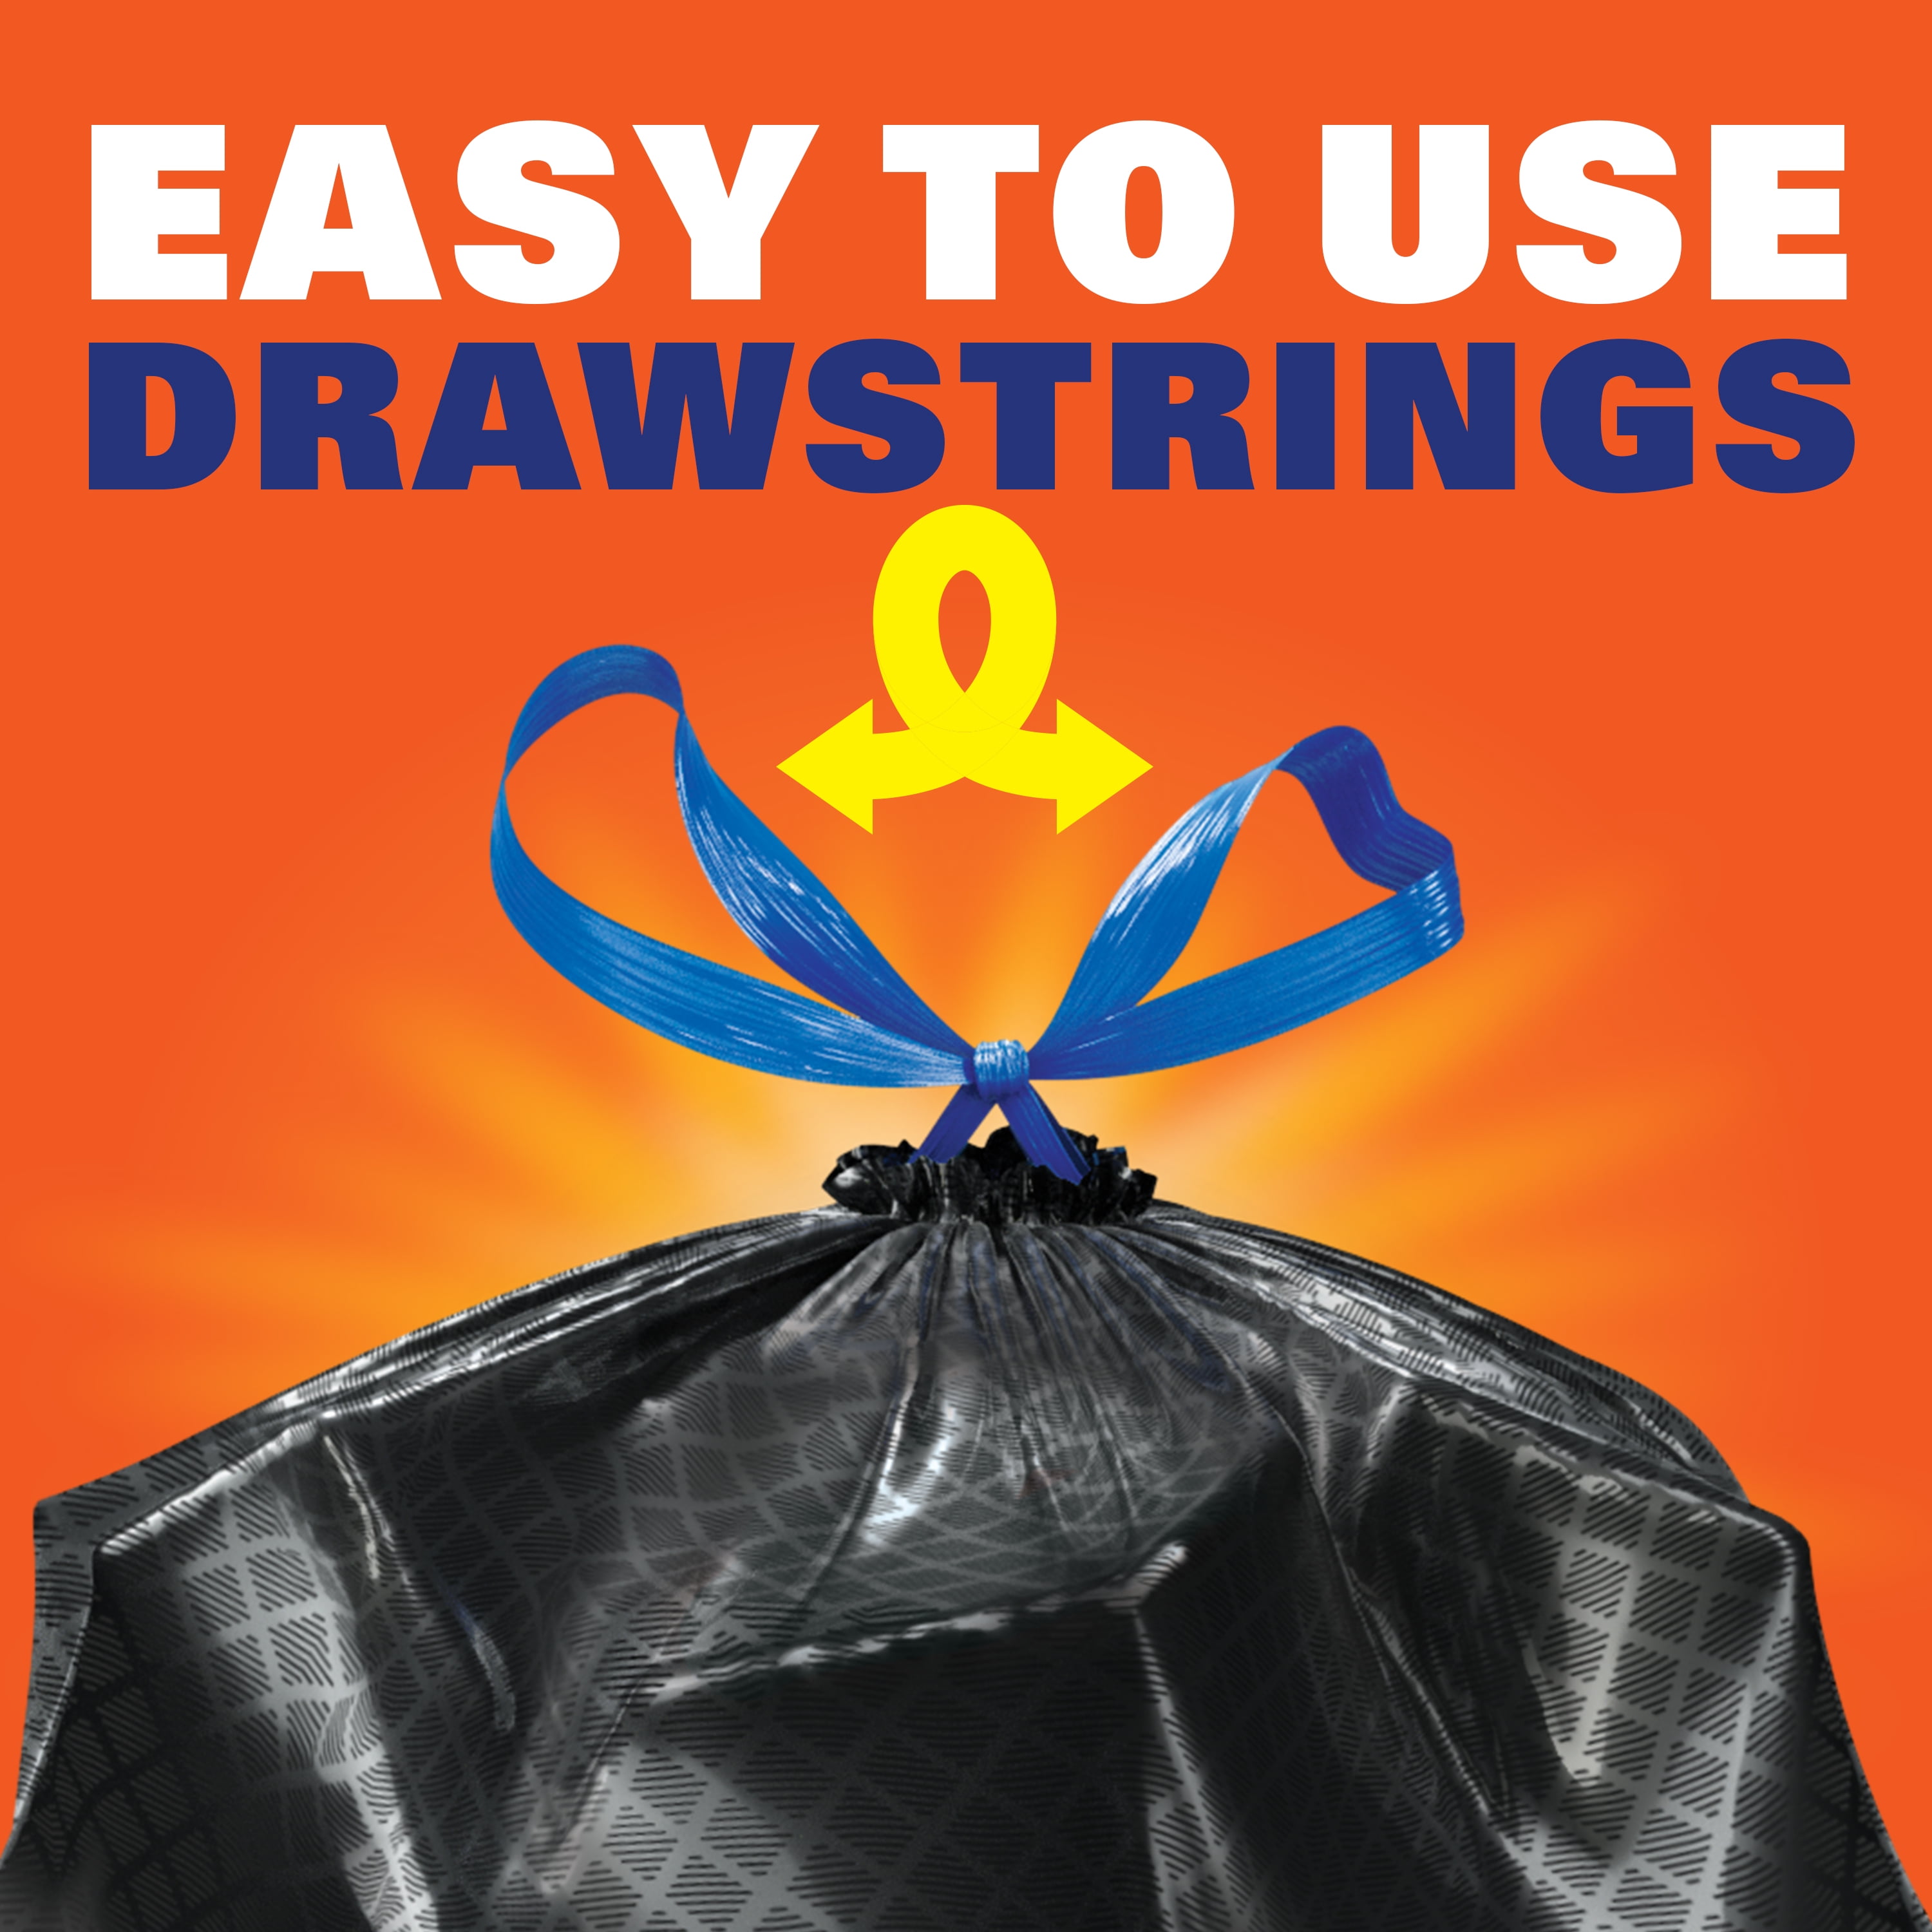 Hefty Ultra Strong Draw String 33 Gal. Trash Bags (50-Count) 00E8357400AC -  The Home Depot